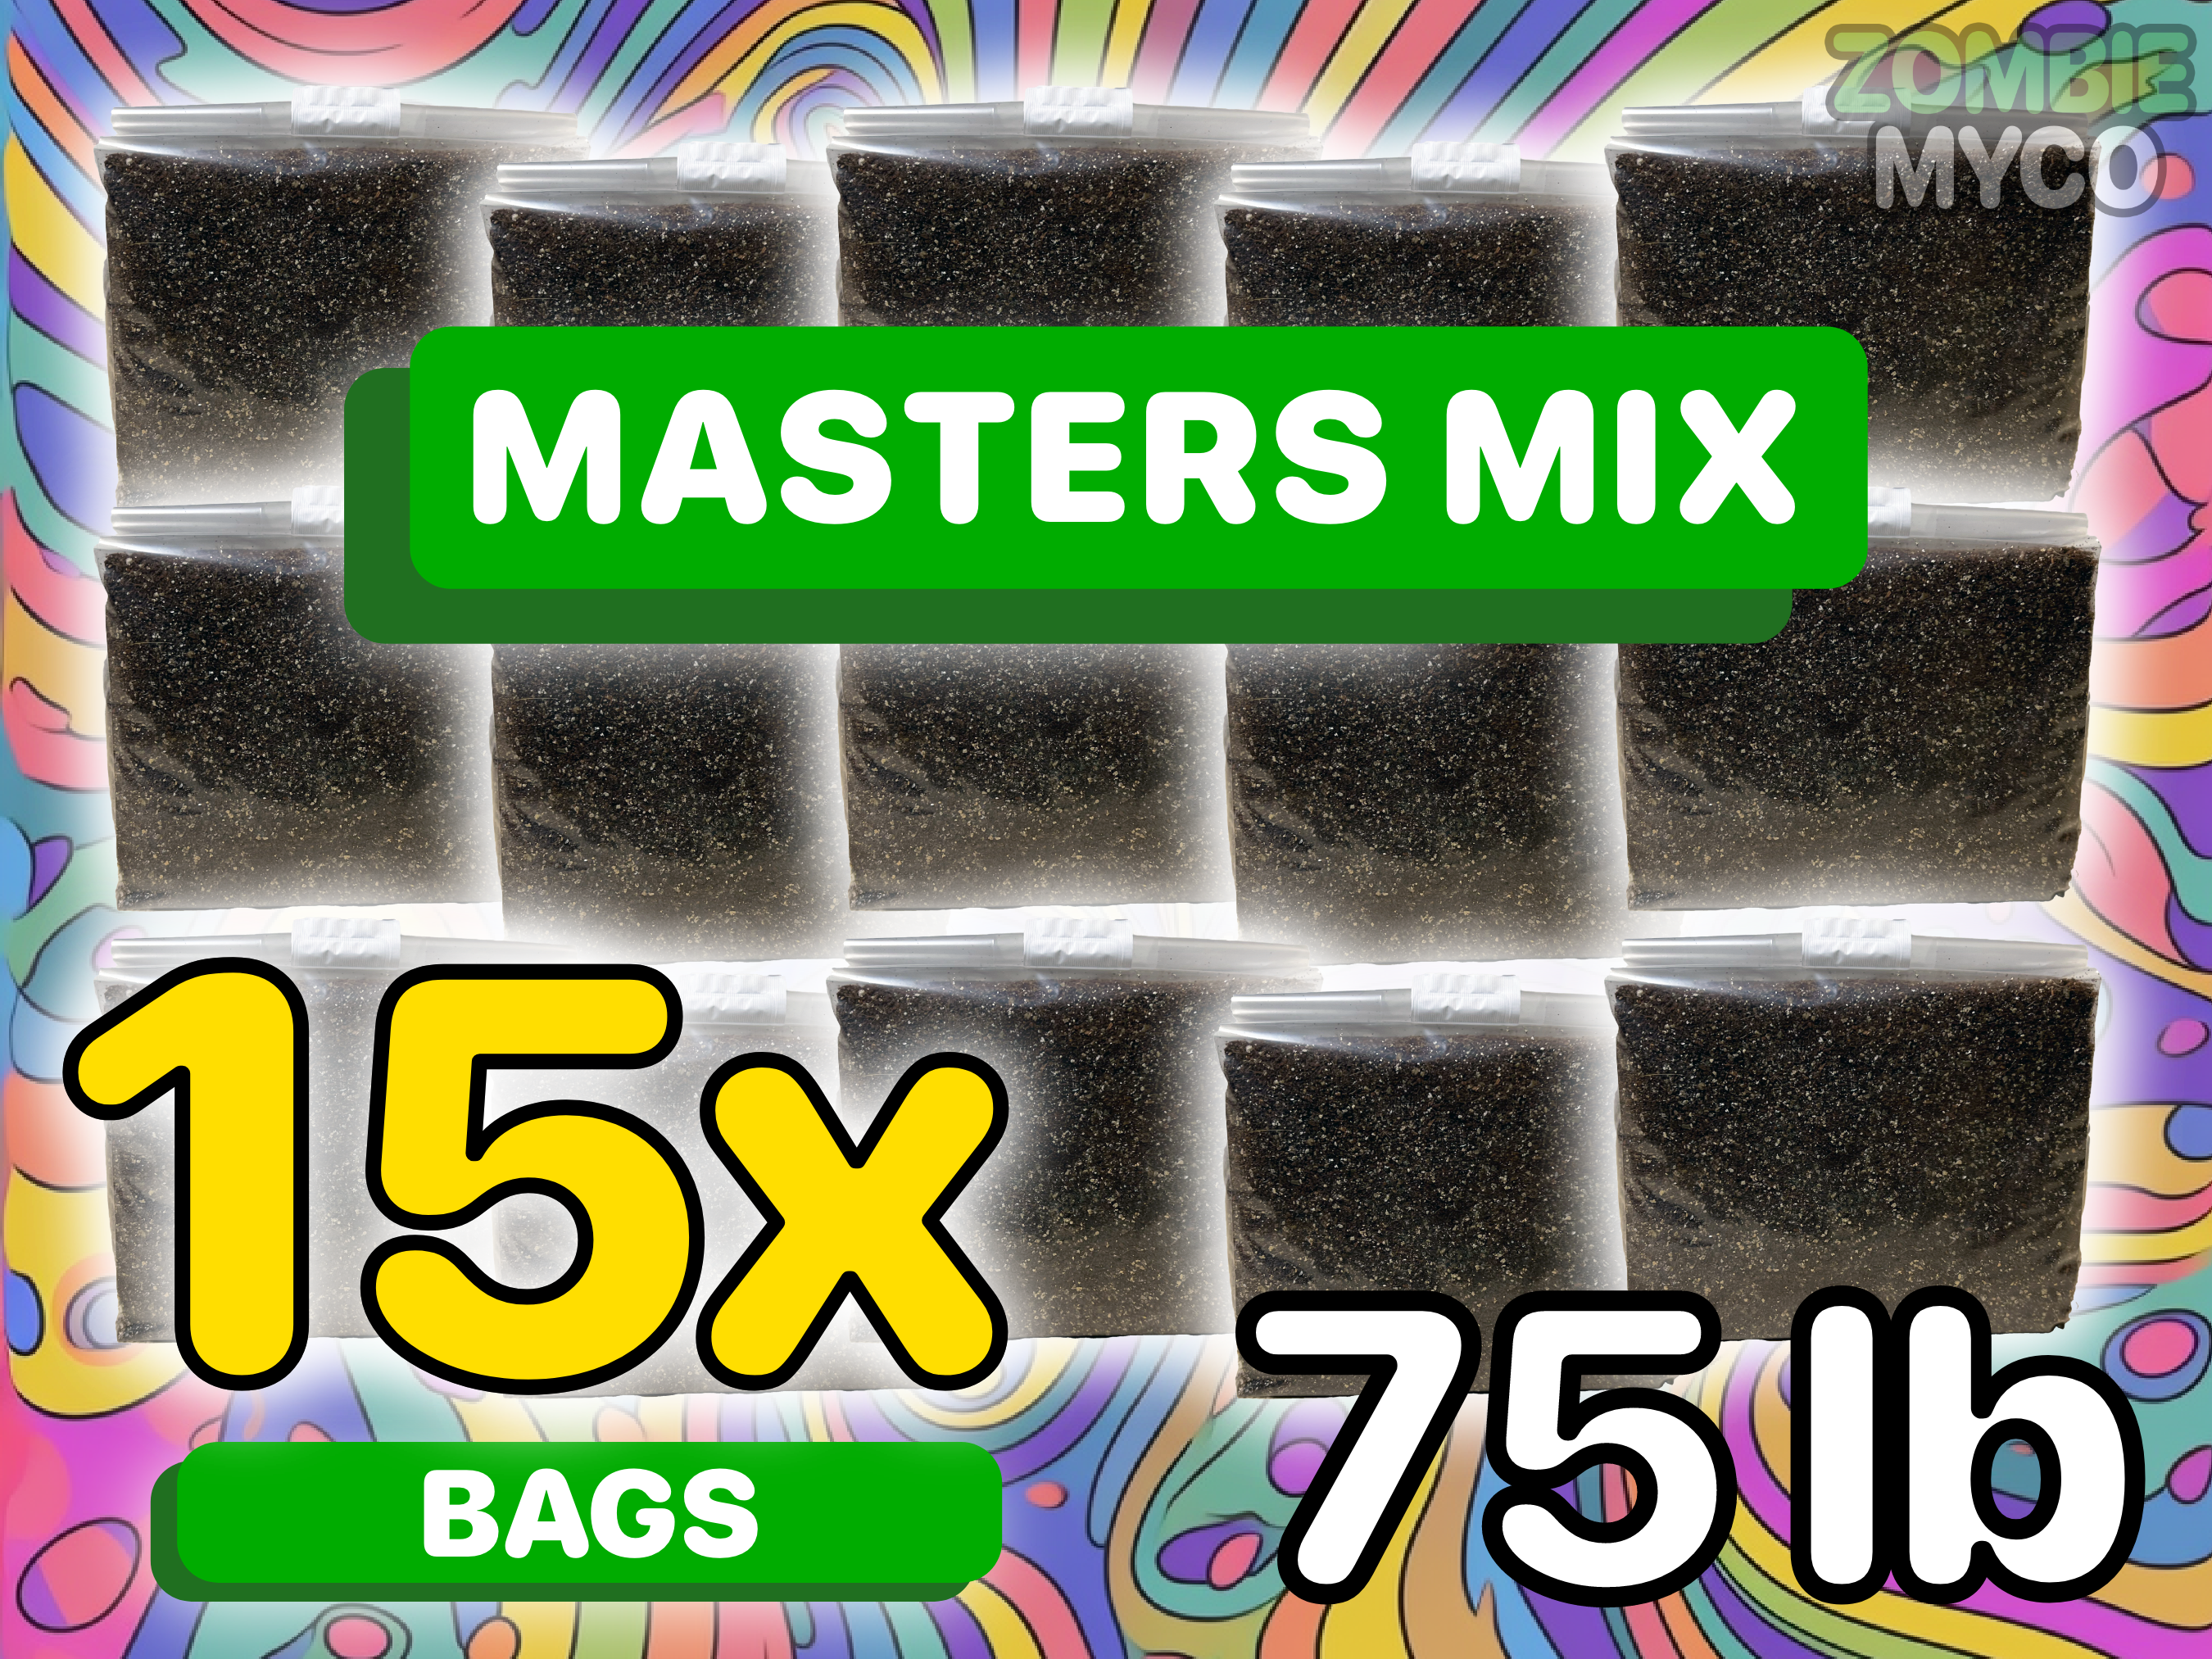 15X BAGS OF MASTER MIX MUSHROOM SUBSTRATE